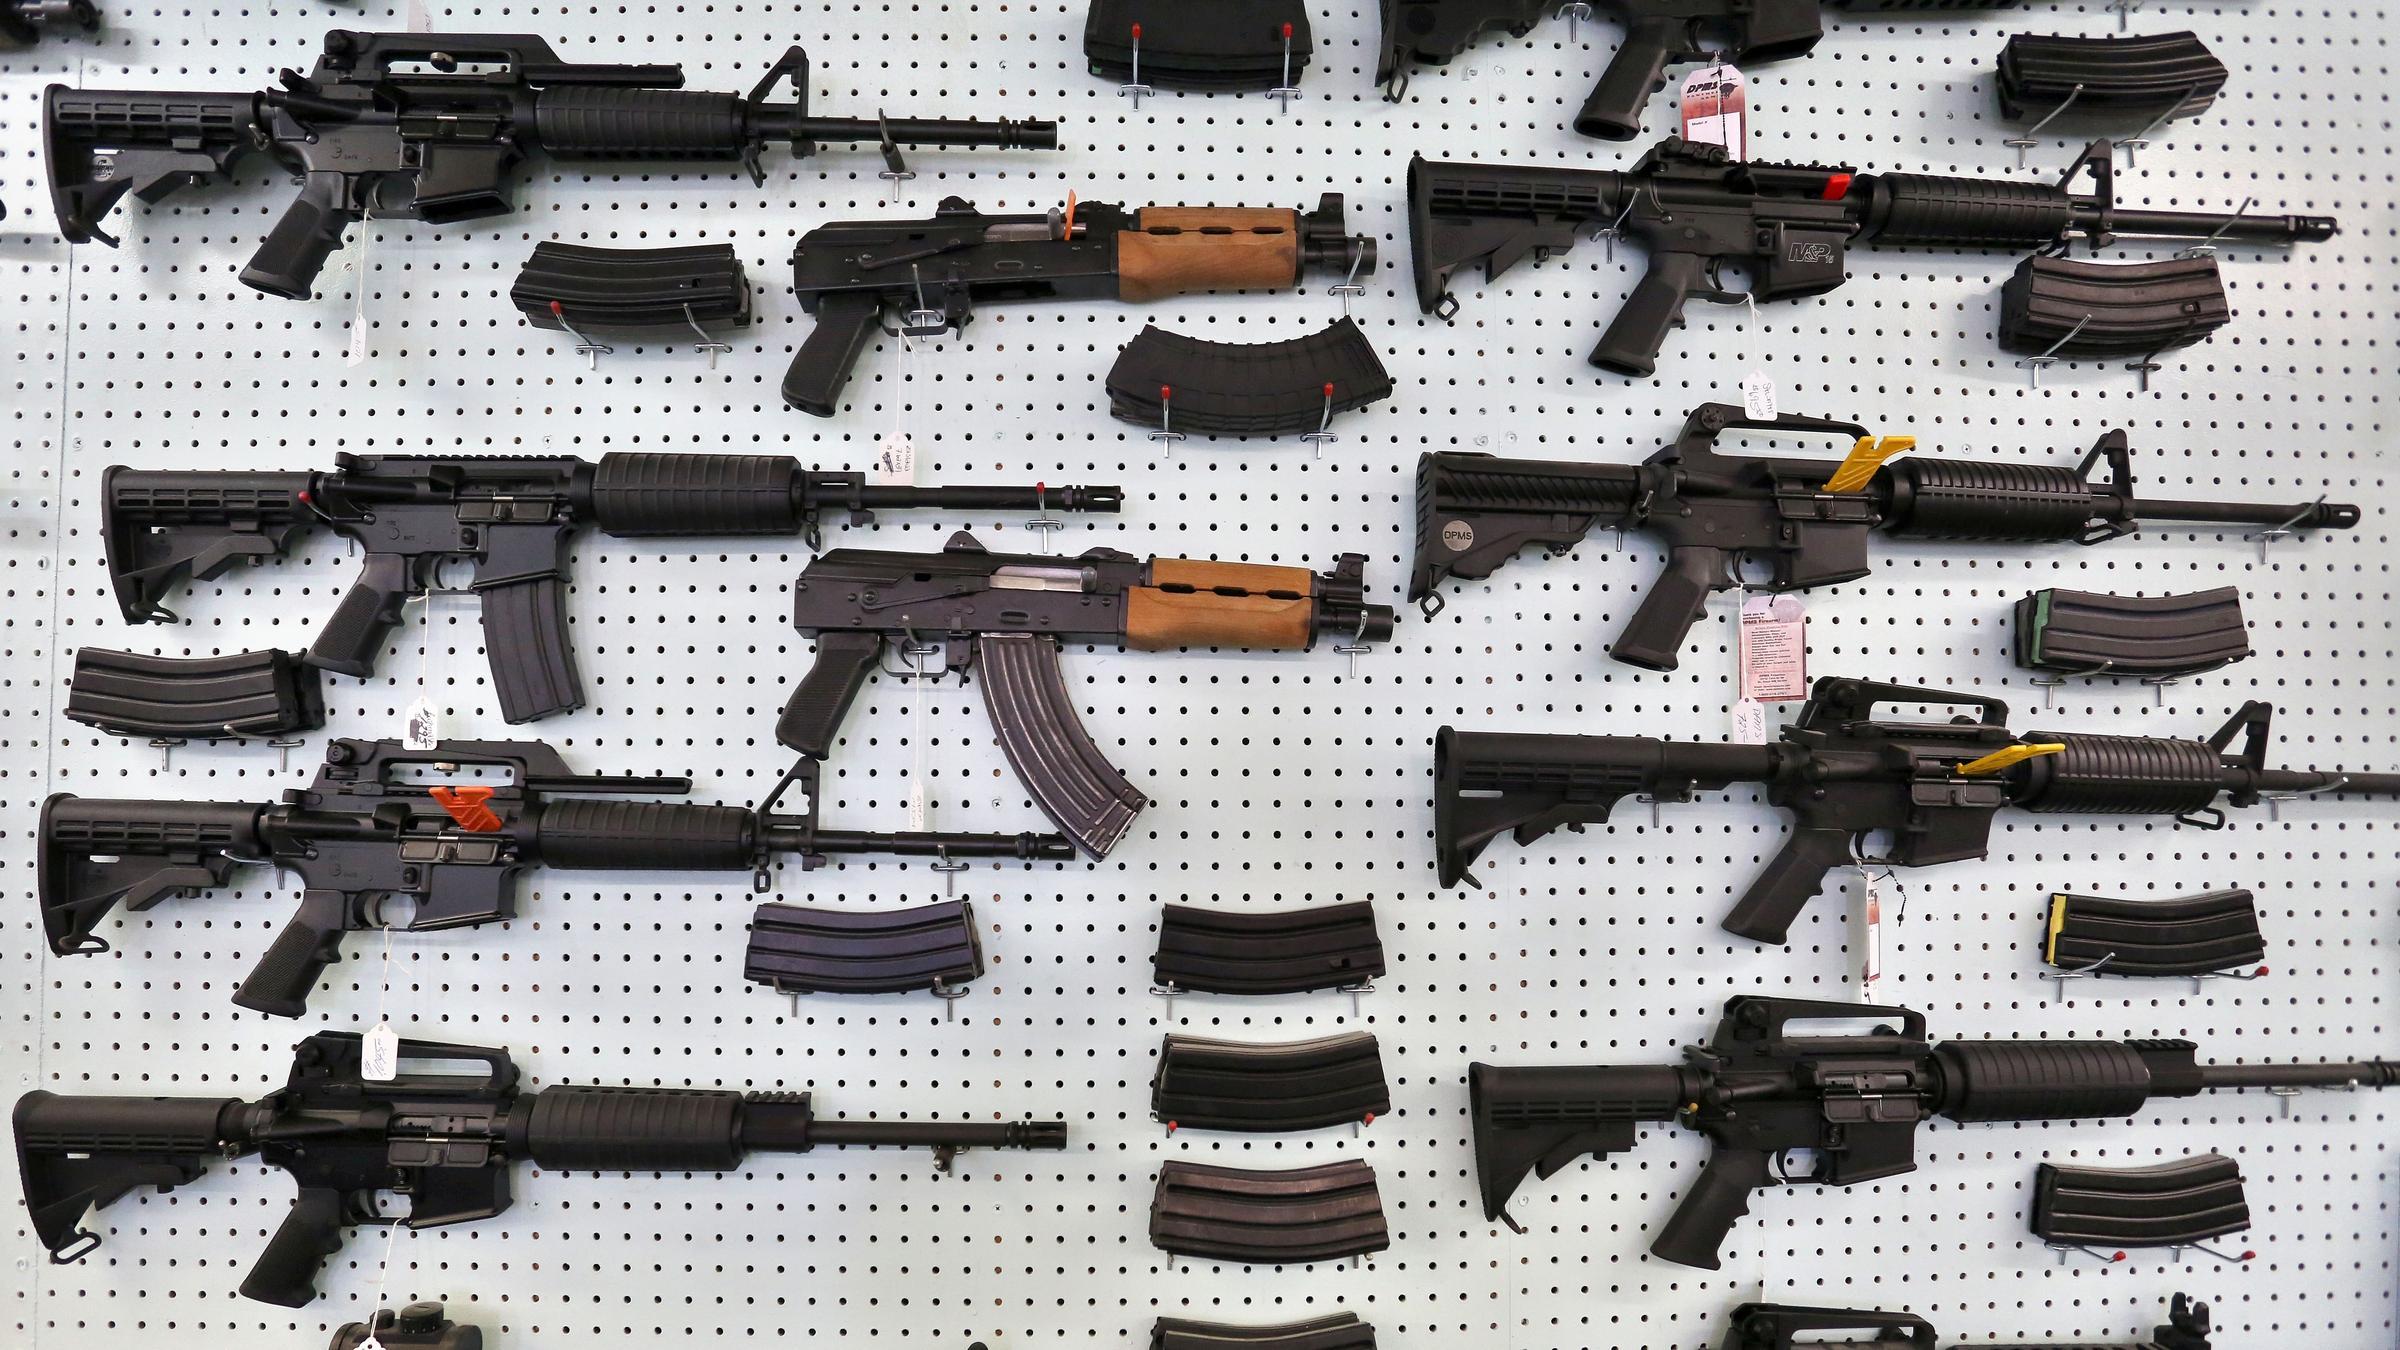 Black Friday Gun Background Checks Reportedly Soar To Record High